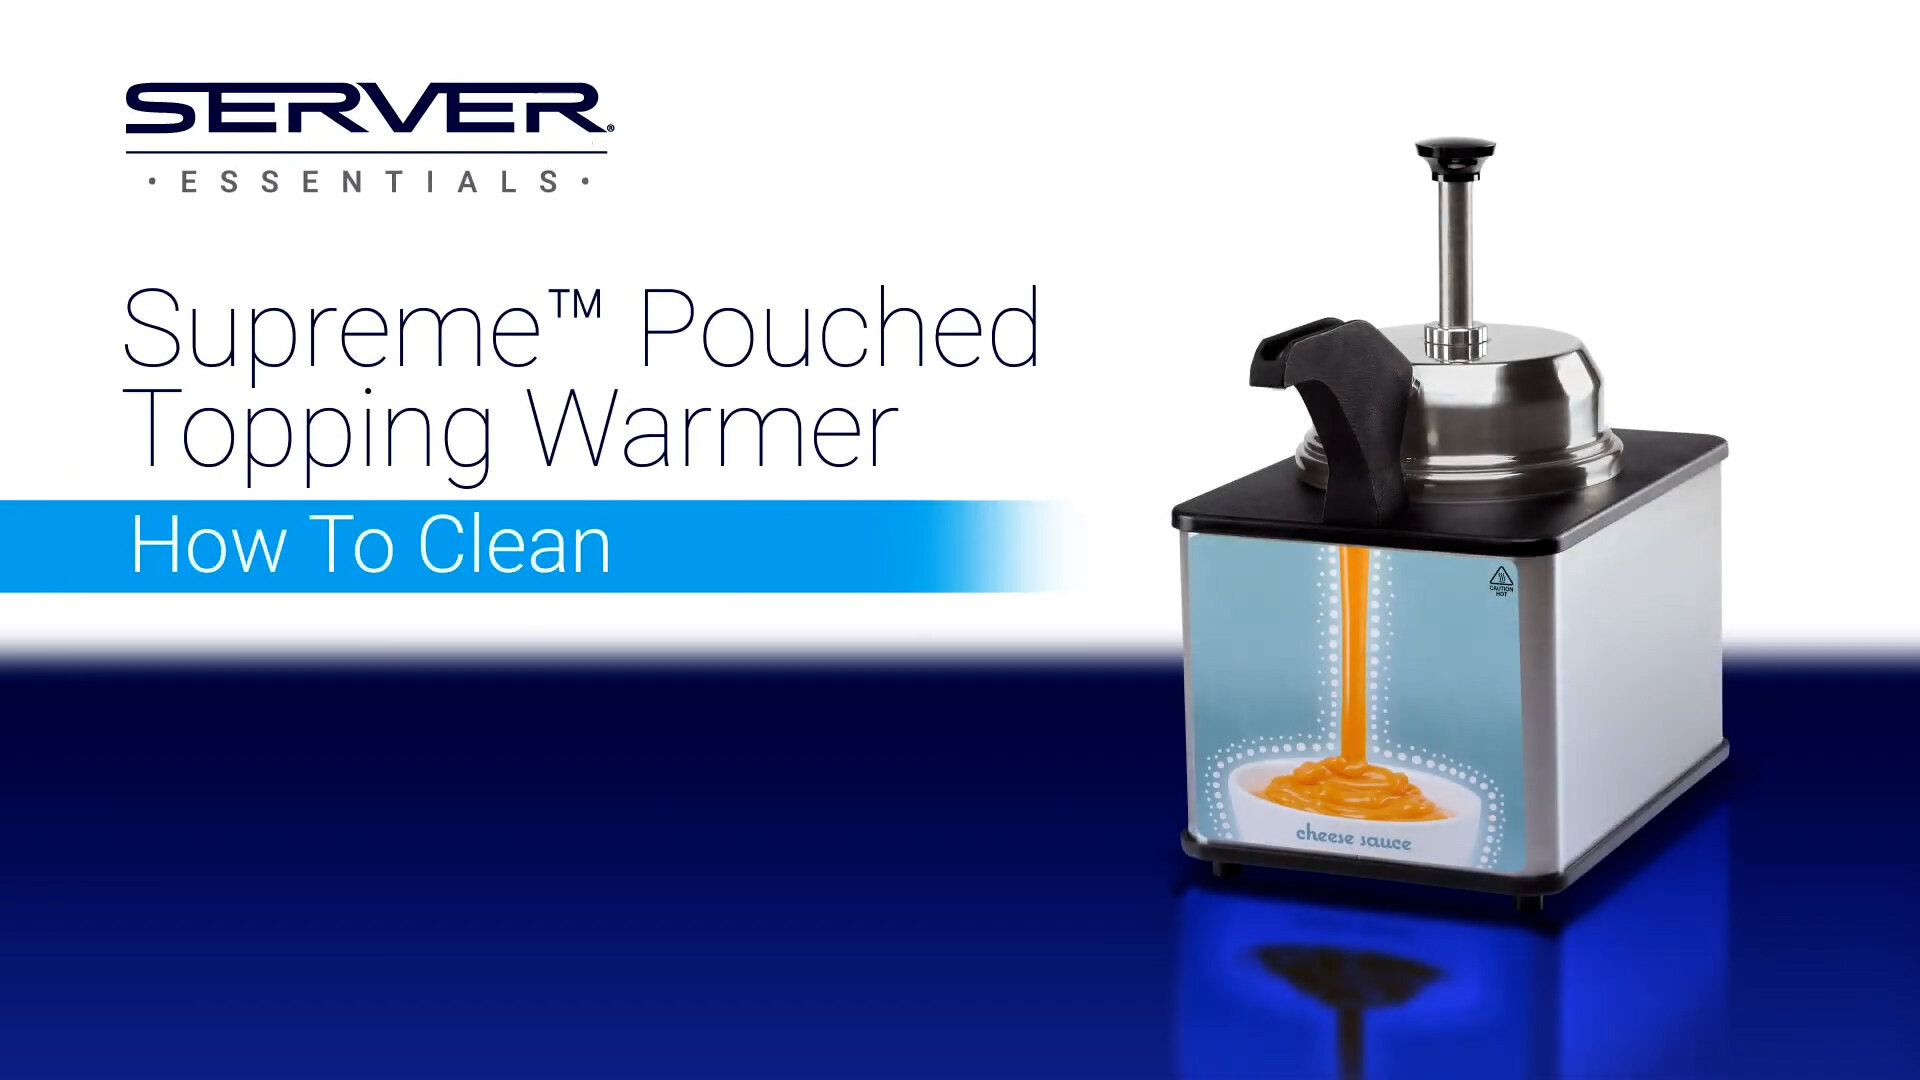 https://cdn.webstaurantstore.com/images/videos/extra_large/server_supreme_pouched_topping_warmer_-_how_to_clean.00_00_02_00.still001.jpg